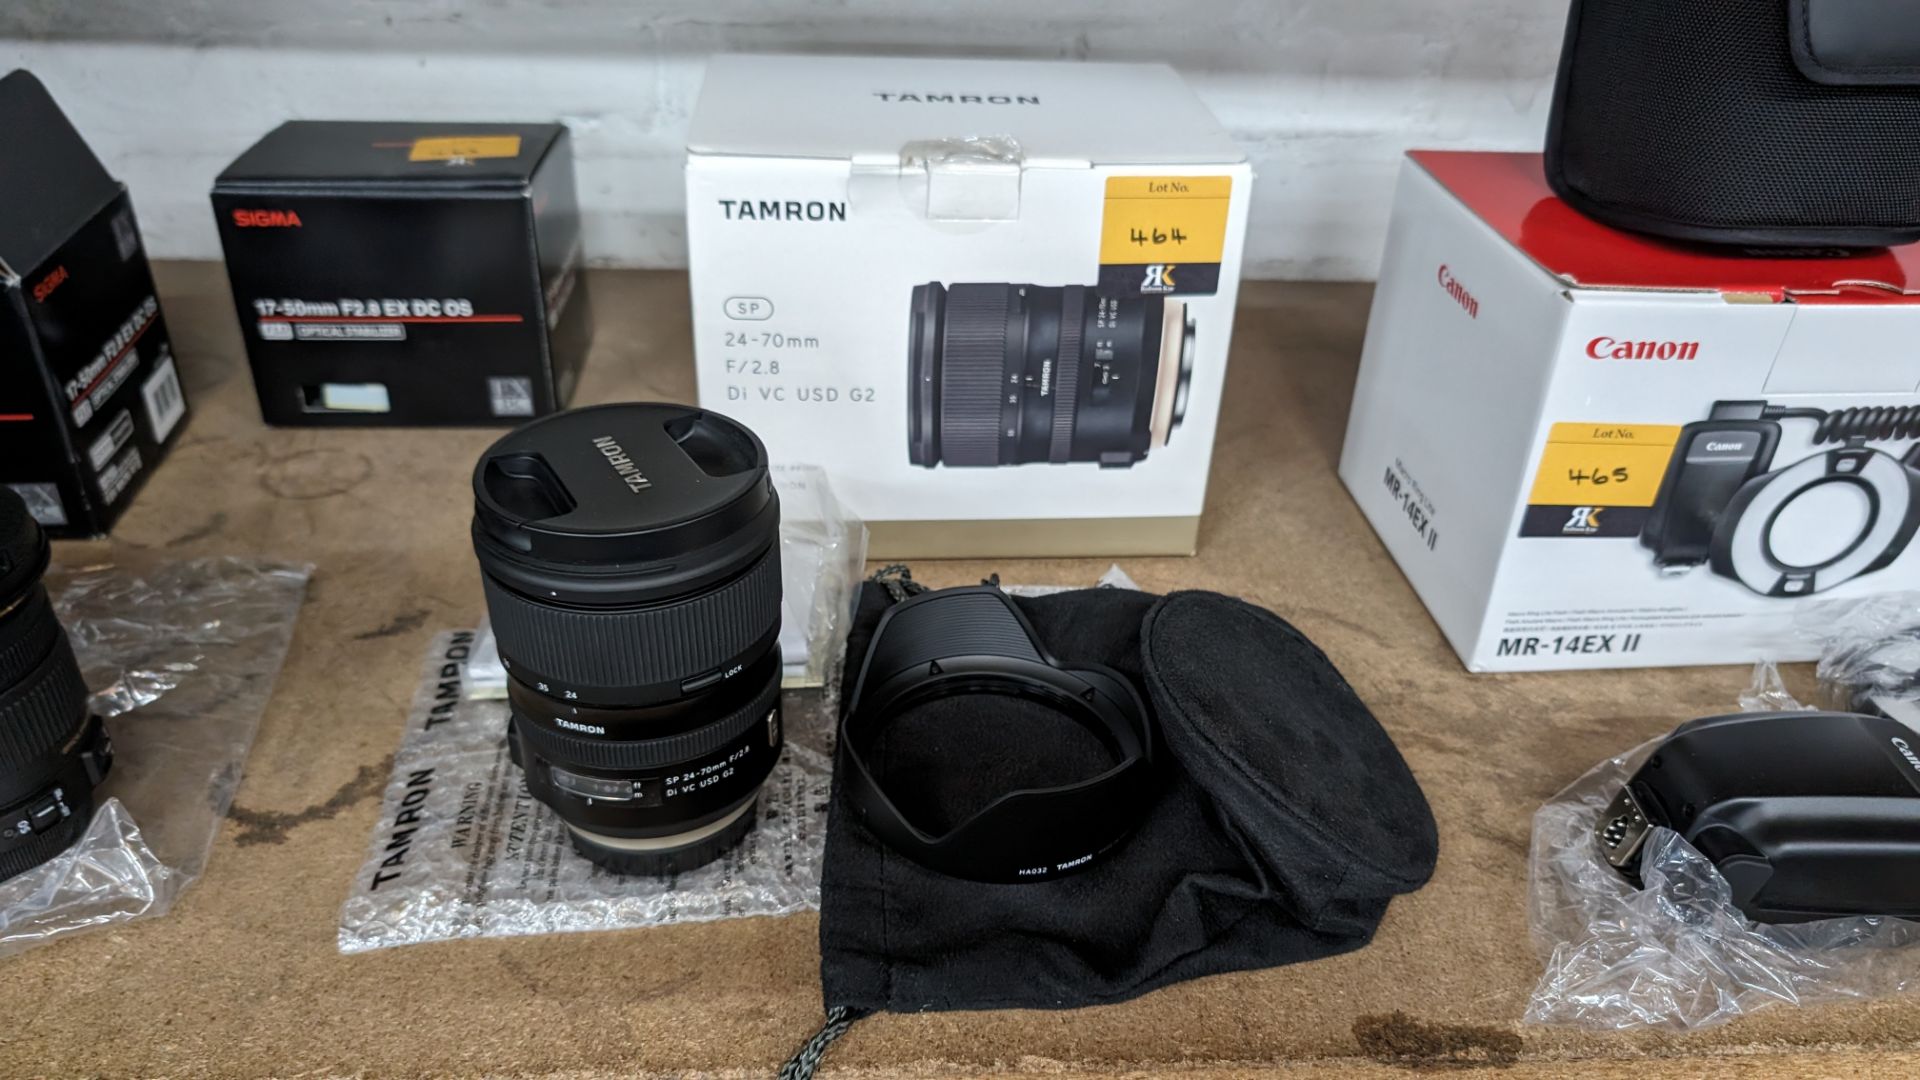 Tamron SP 24-70mm f/2.8 Di VC USD G2 lens, including soft carry case and attachment - Image 2 of 10